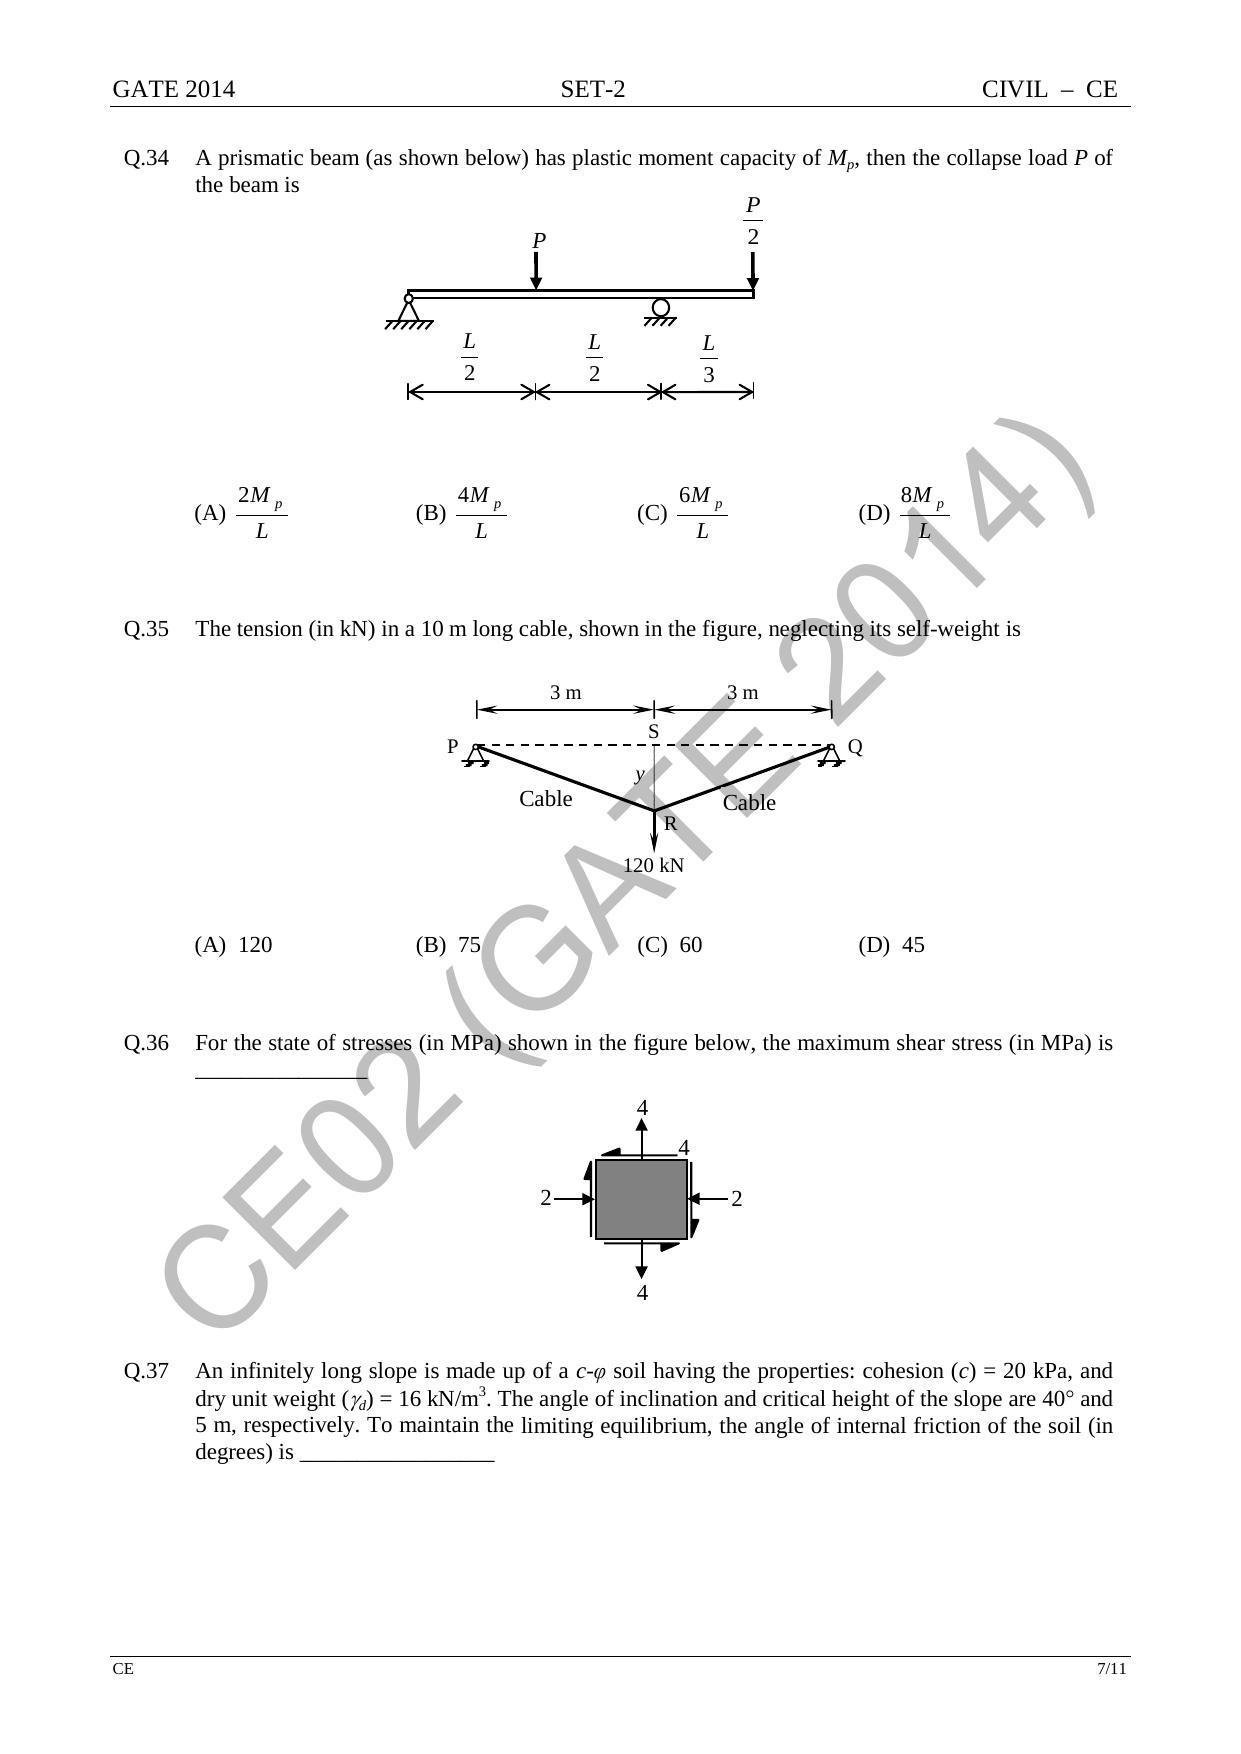 GATE 2014 Civil Engineering (CE) Question Paper with Answer Key - Page 35